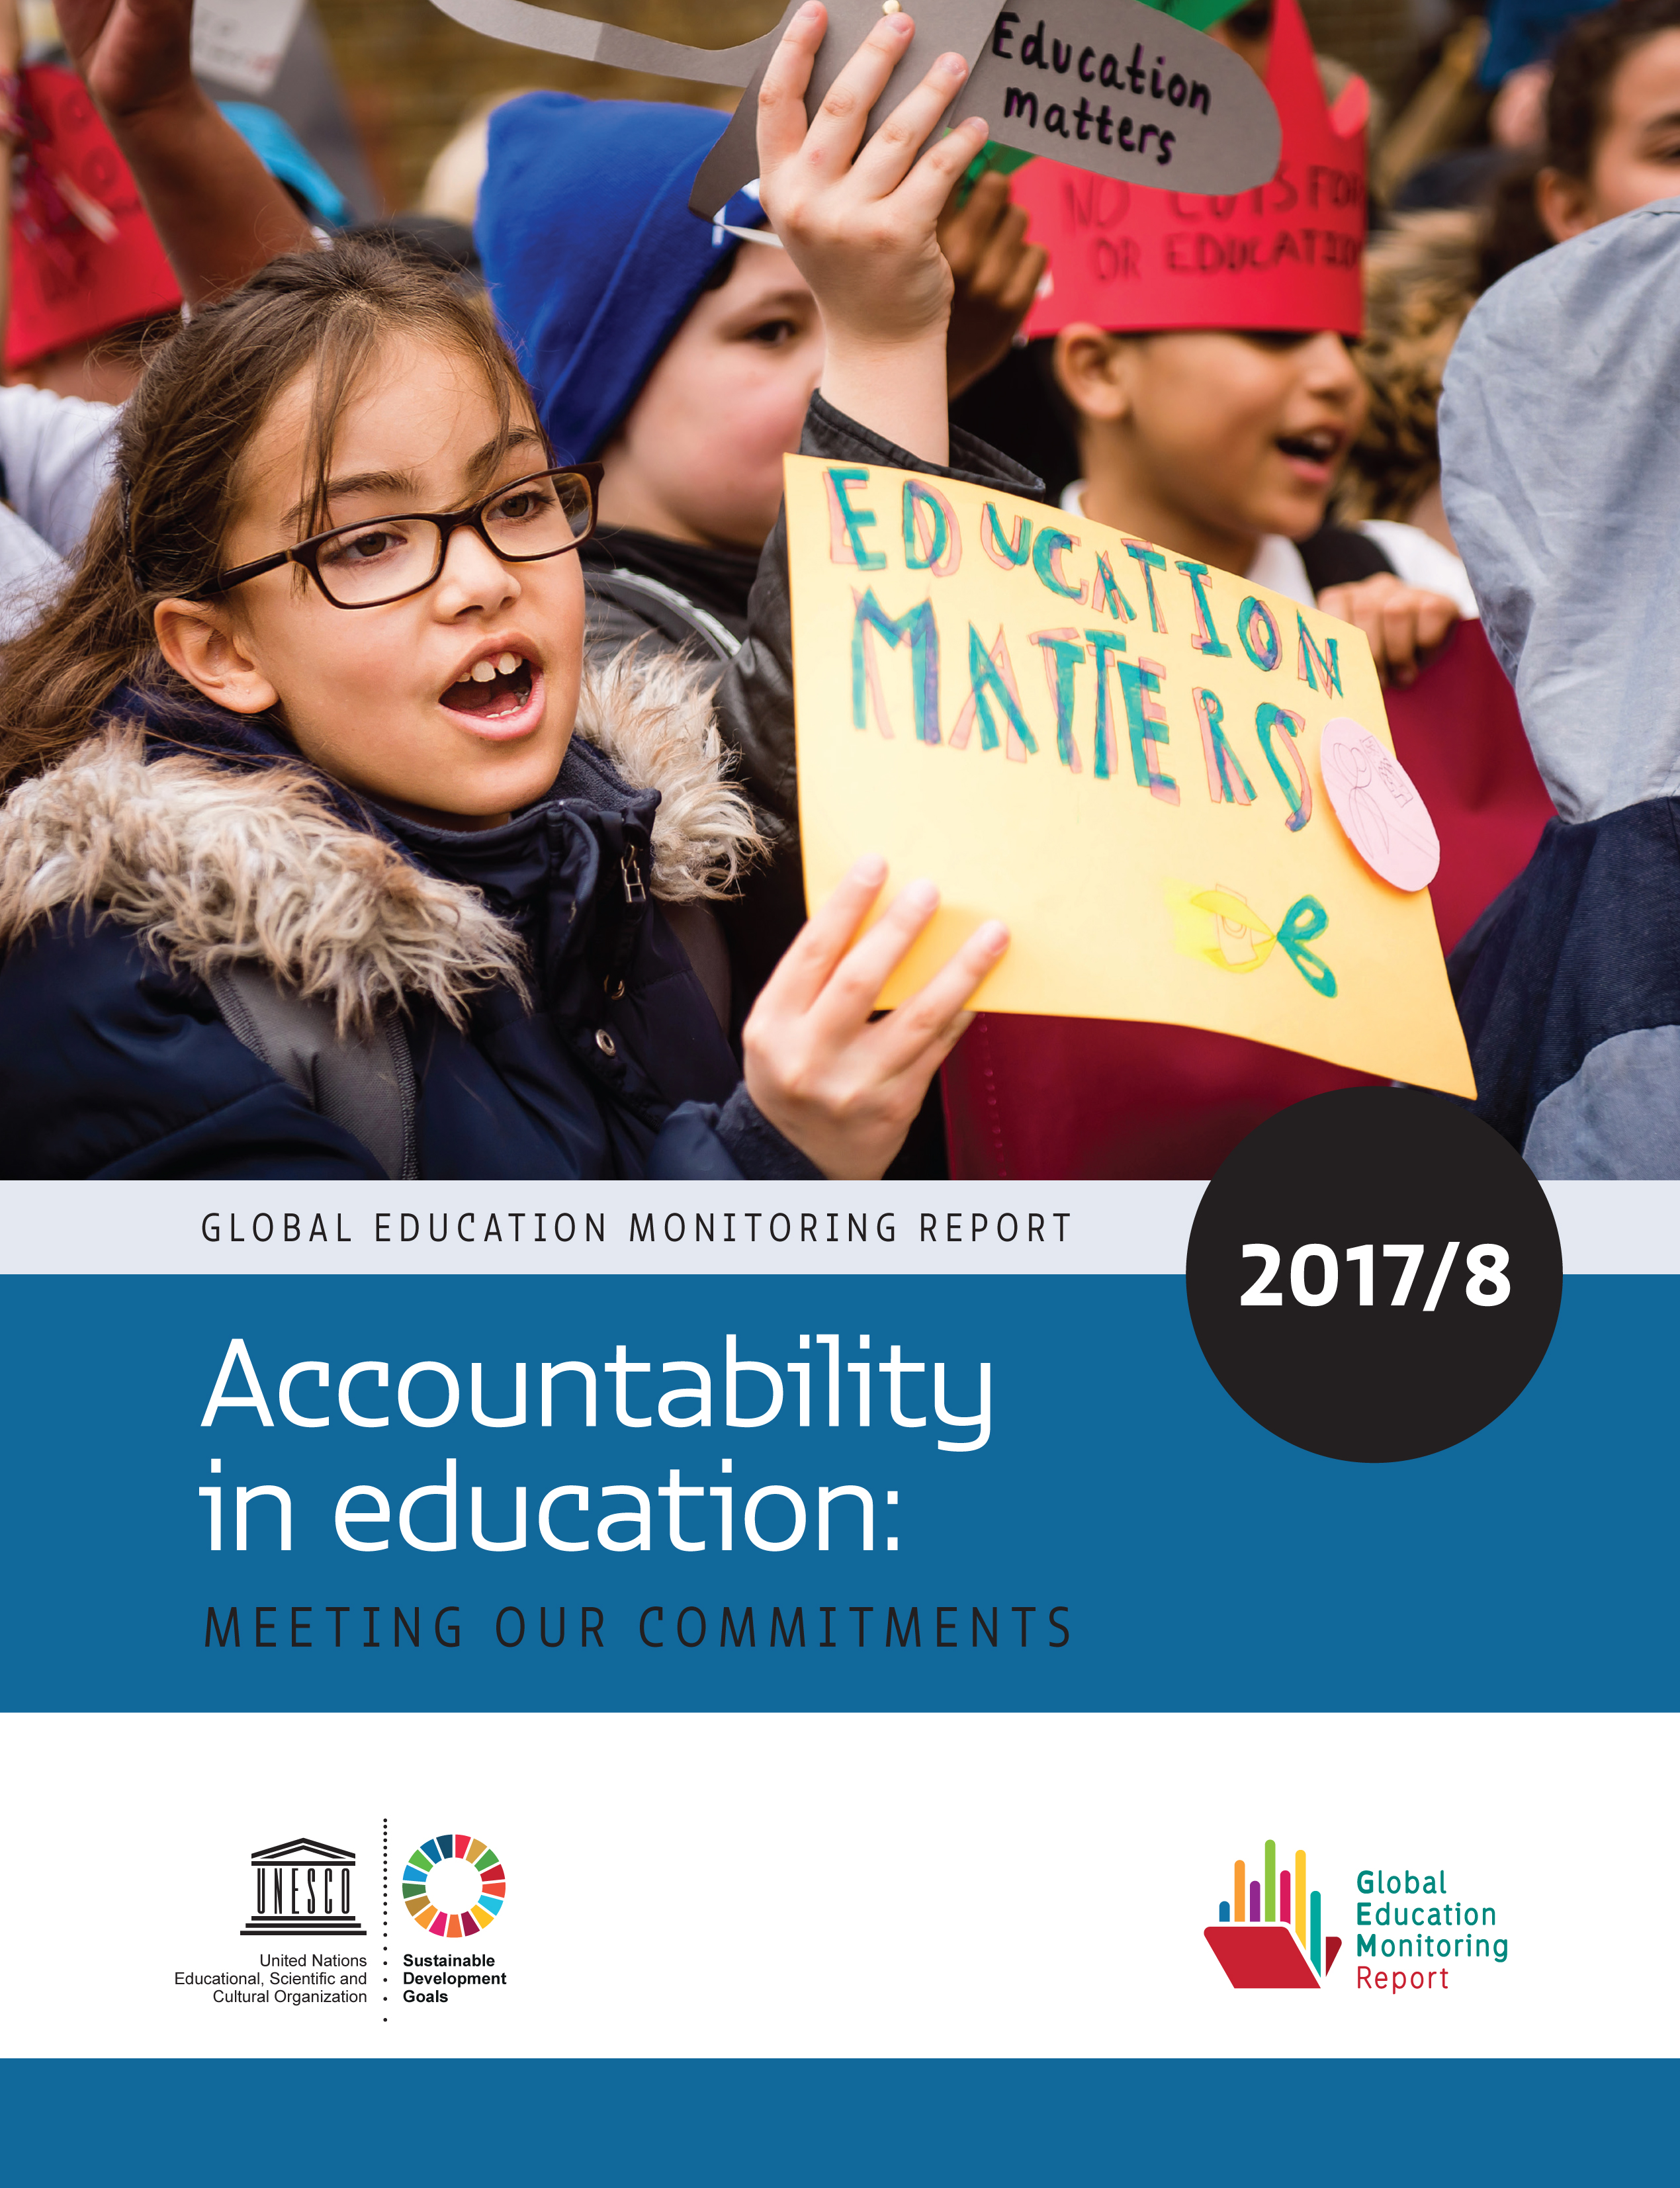 image of Global Education Monitoring Report 2017/8